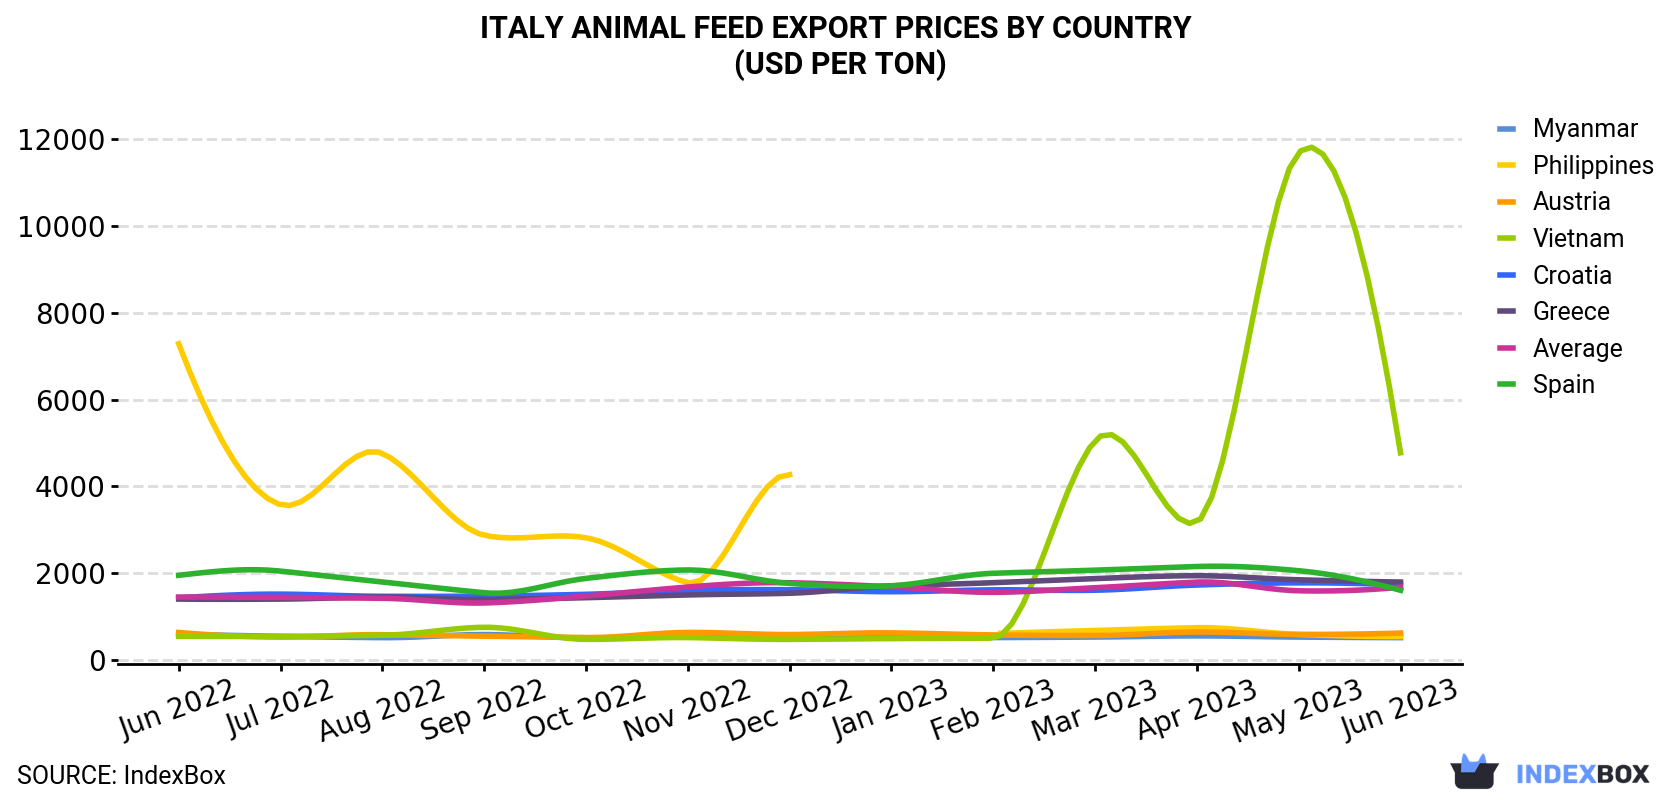 Italy Animal Feed Export Prices By Country (USD Per Ton)